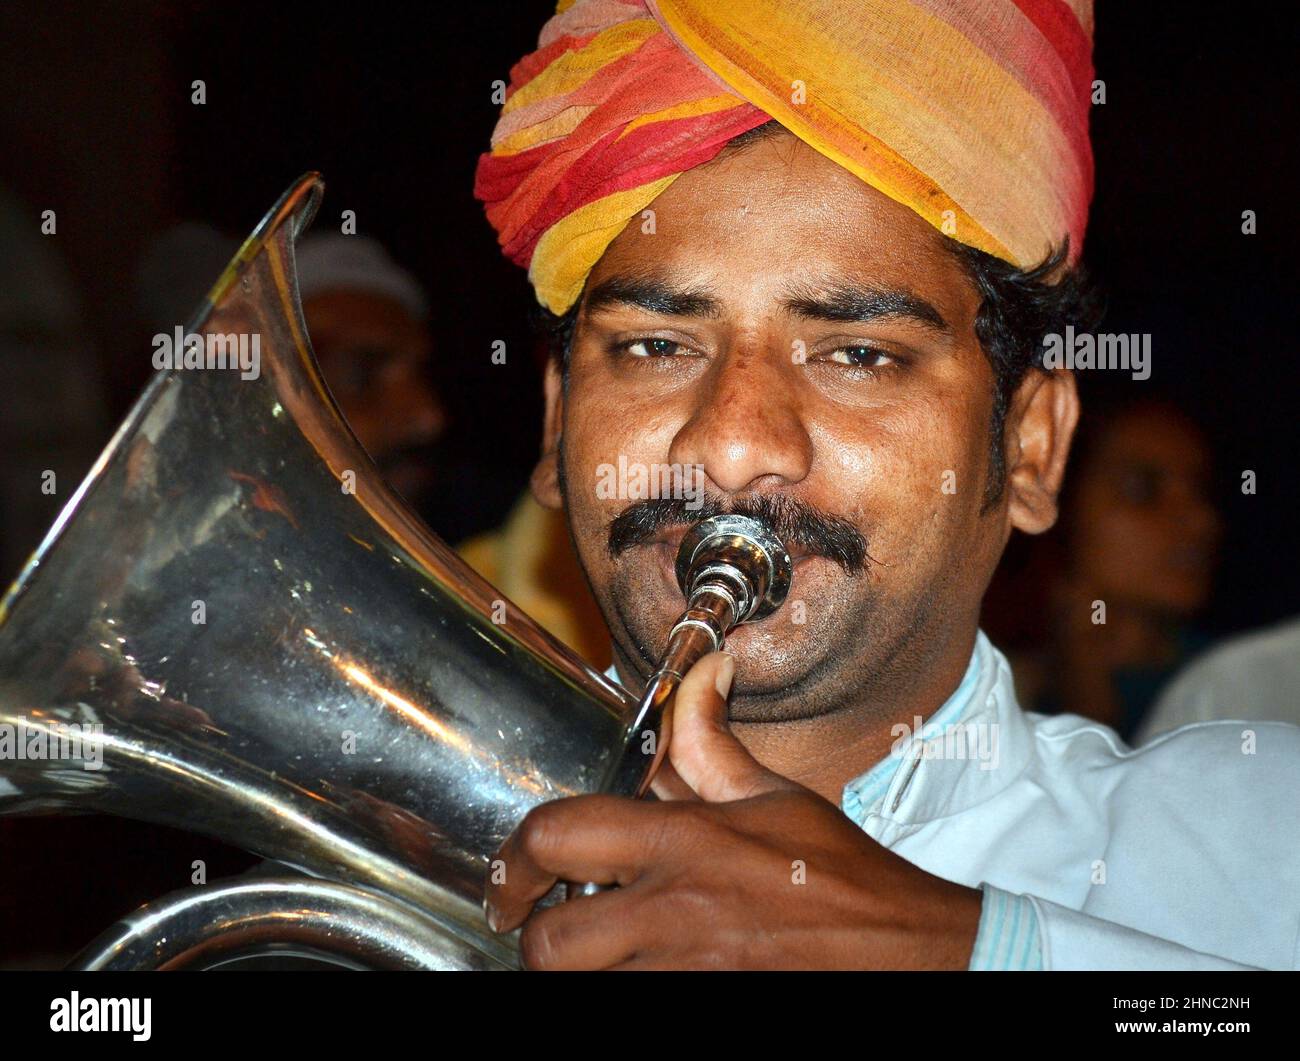 Young turbaned euphoniumist from a marching Indian British brass band plays his traditional euphonium musical instrument and looks at the viewer. Stock Photo